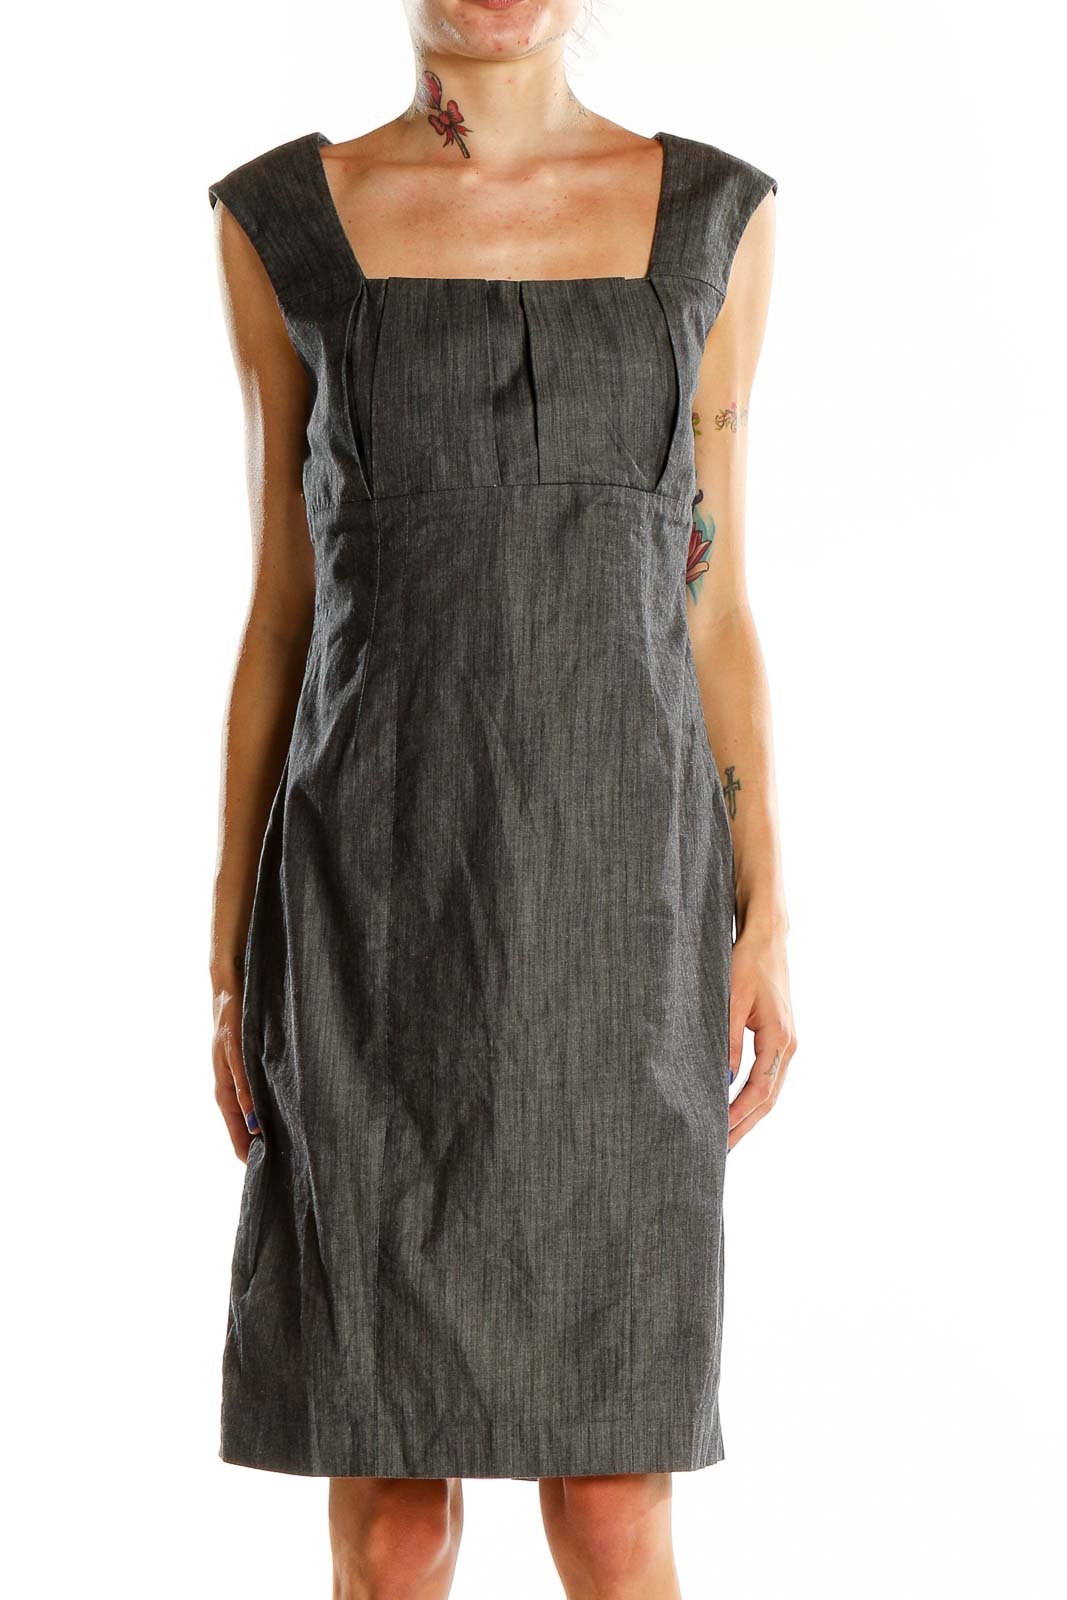 Gray Work Sheath Dres Front